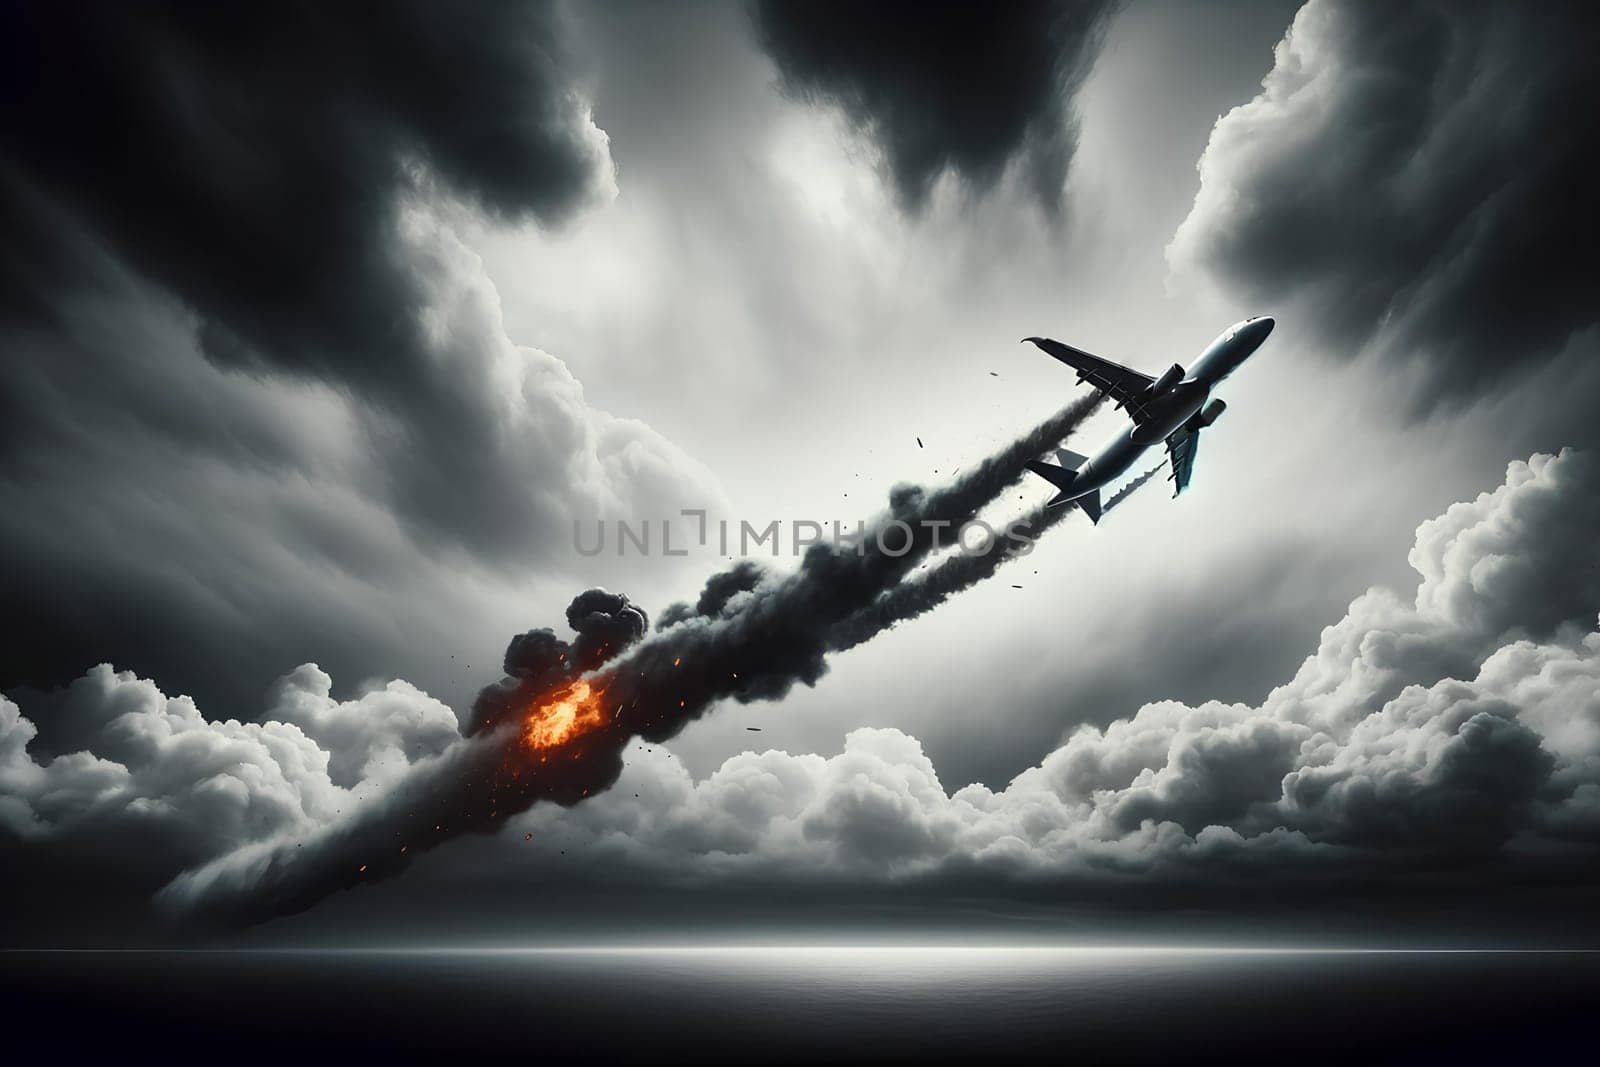 plane crash, plane falling from the sky with thick black smoke from engines against dramatic sky.